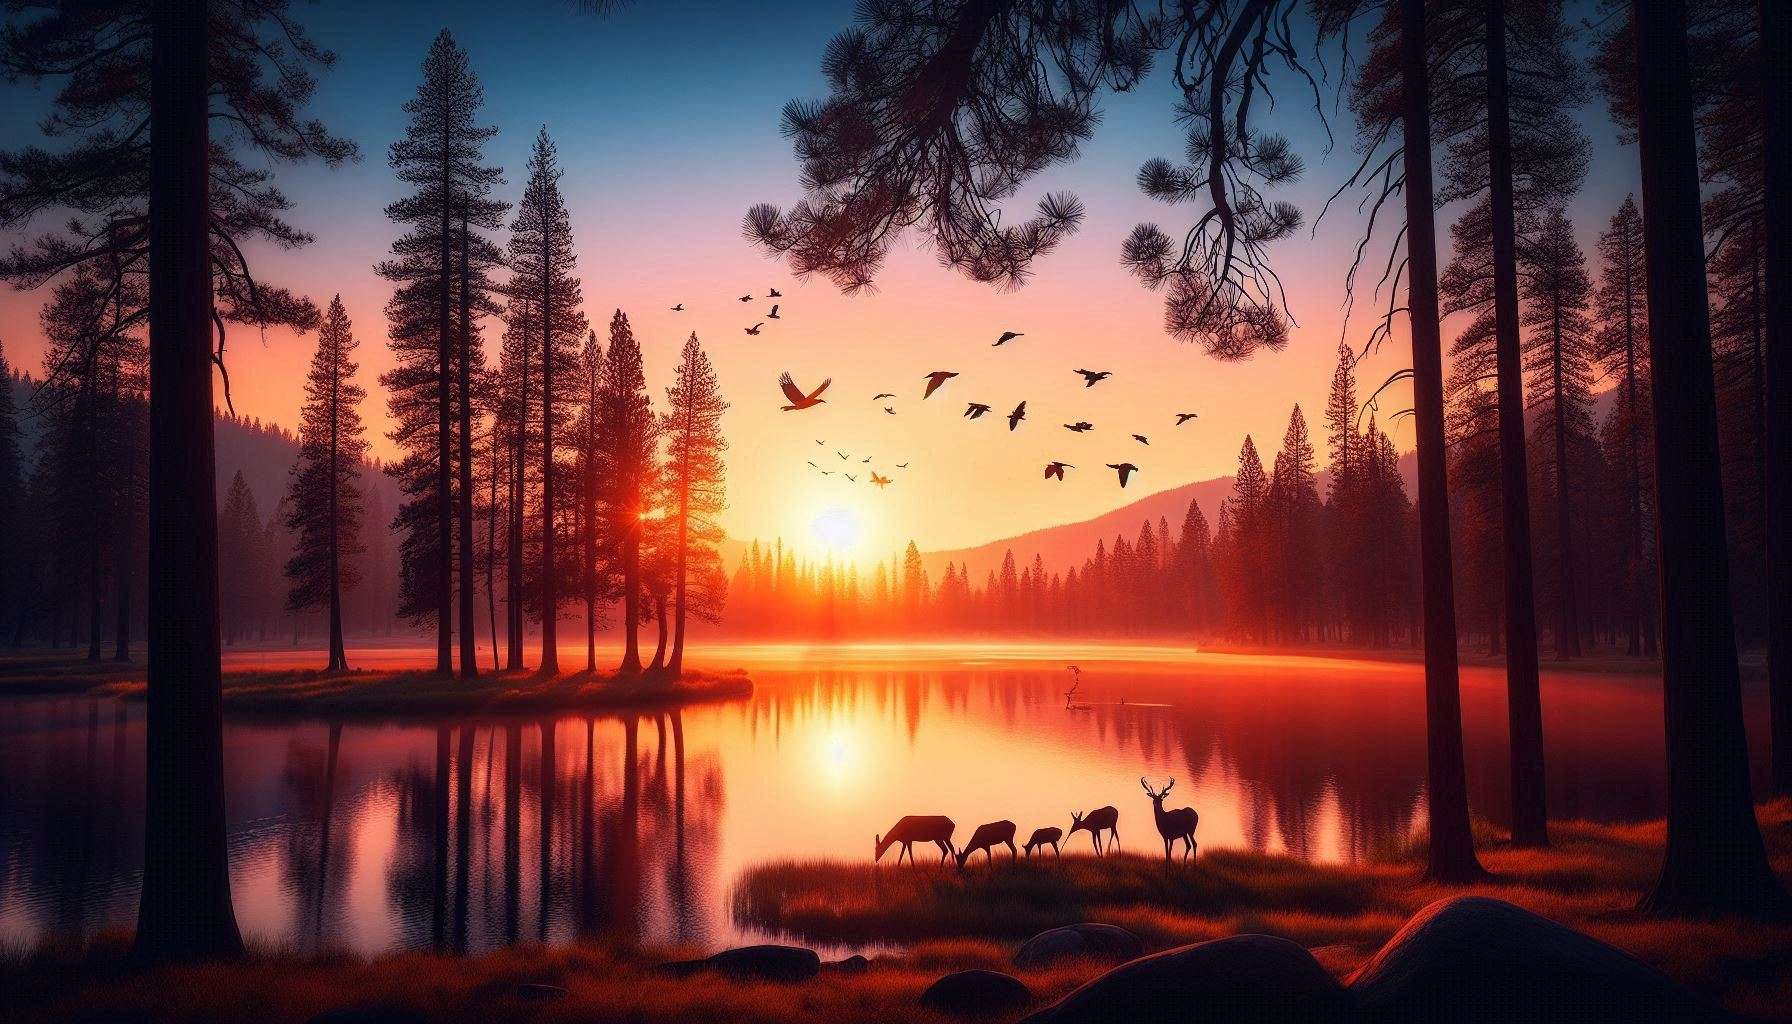 sunset nature wallpaper with silhouettes